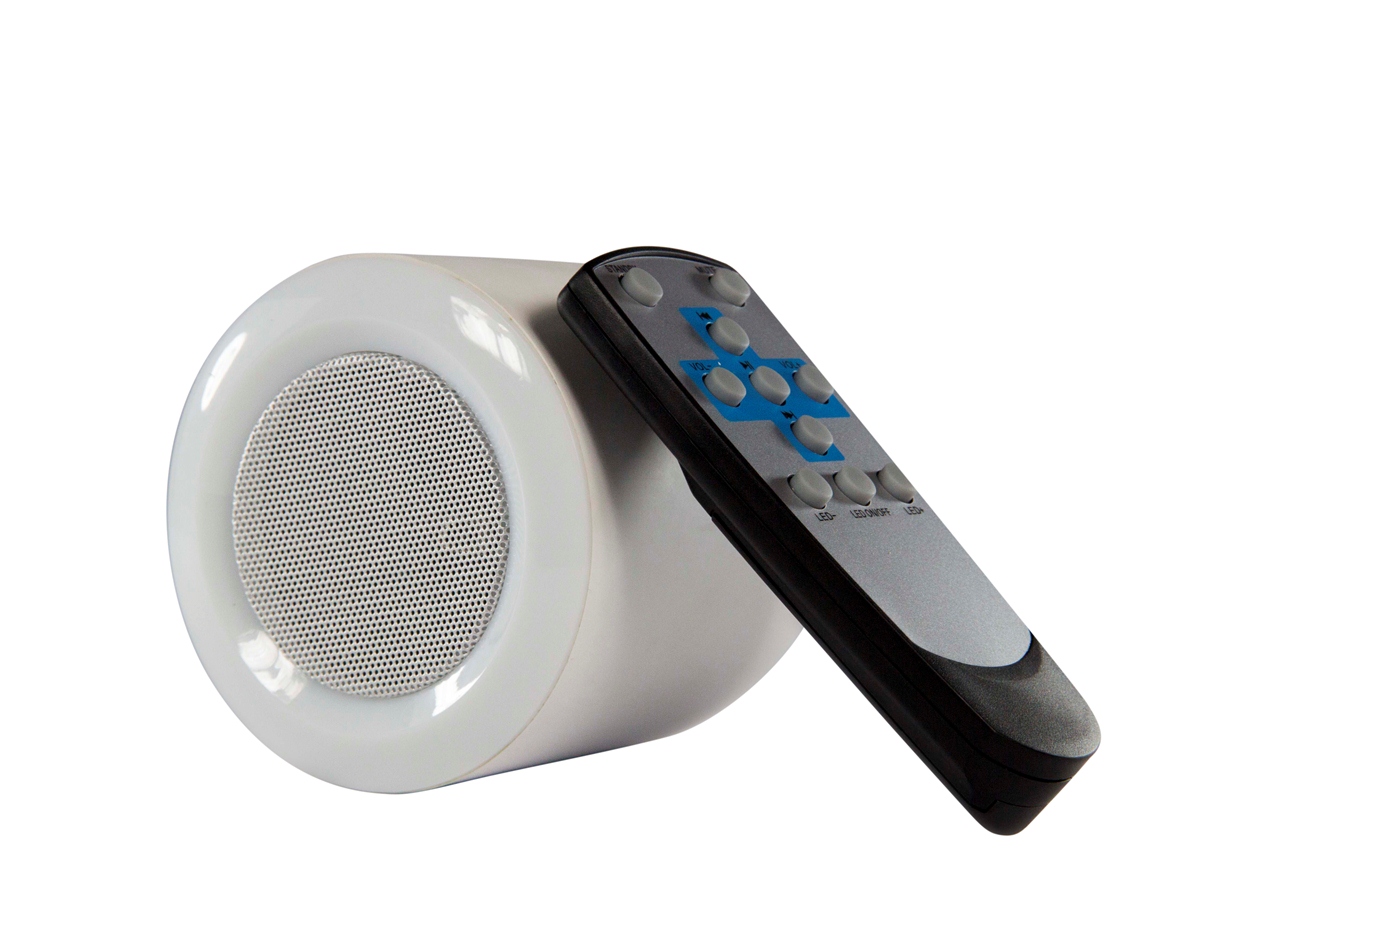 LED speaker bulb with remote